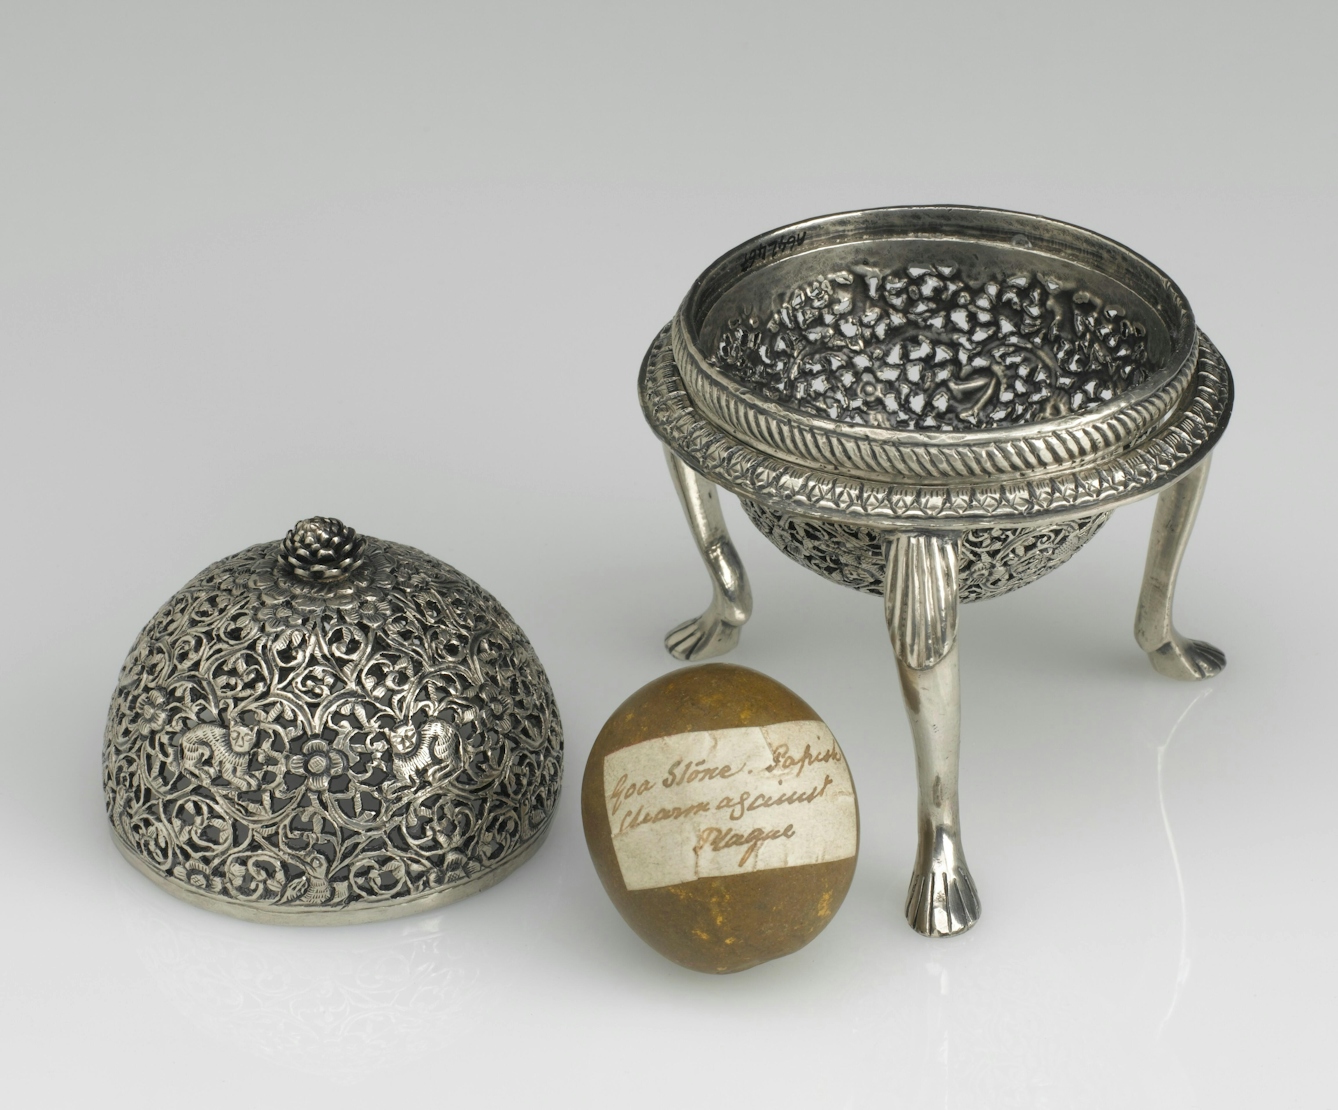 Photograph of a silver three legged case with its lid off and a goa stone with label, resting on a grey background.